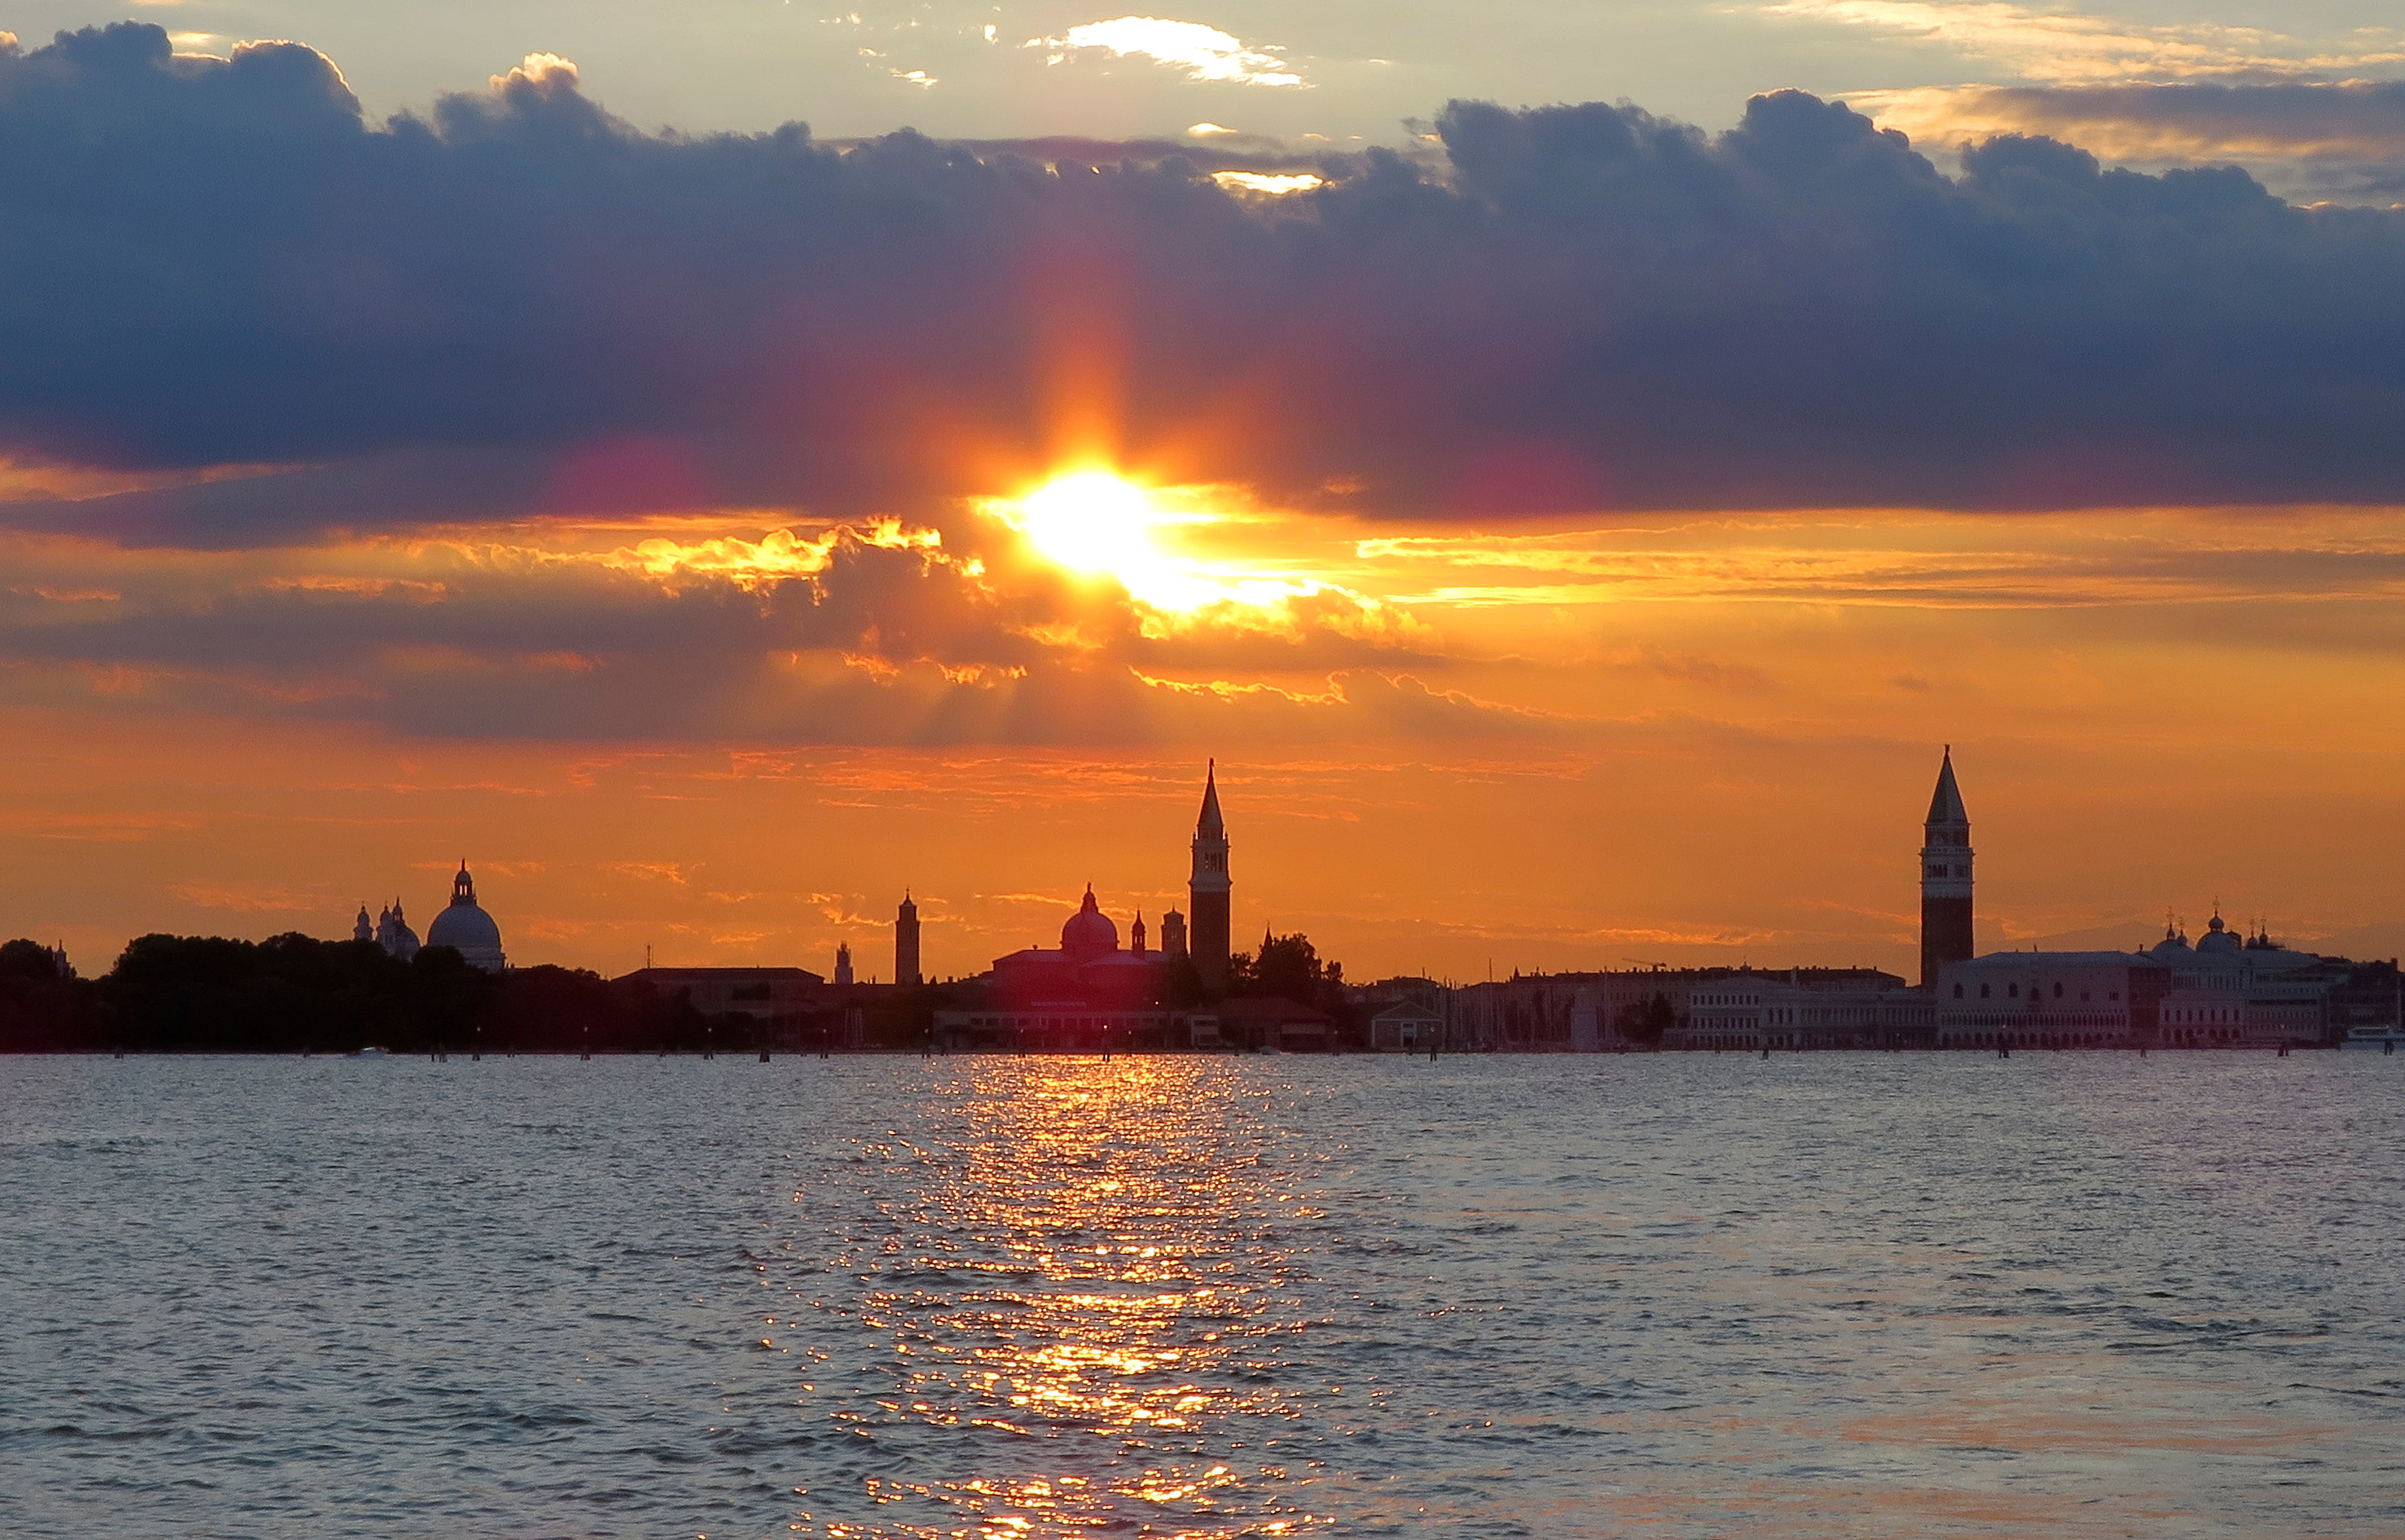 The city skyline of Venice is seen during the sun sets in the Venetian lagoon